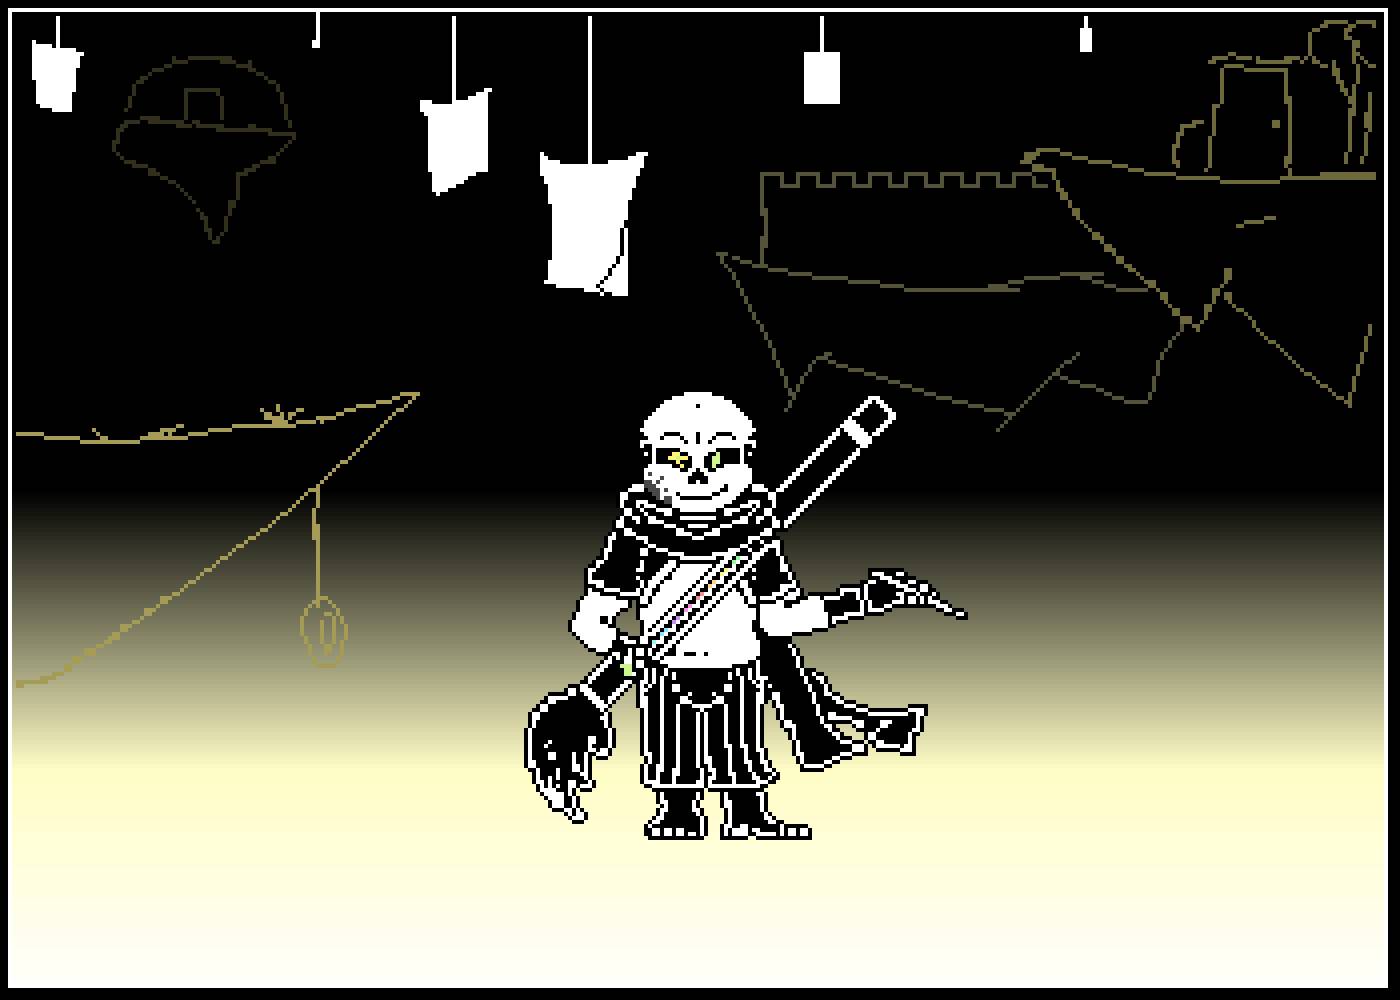 Ink Sans [the new one] animation by SooSSpy on DeviantArt